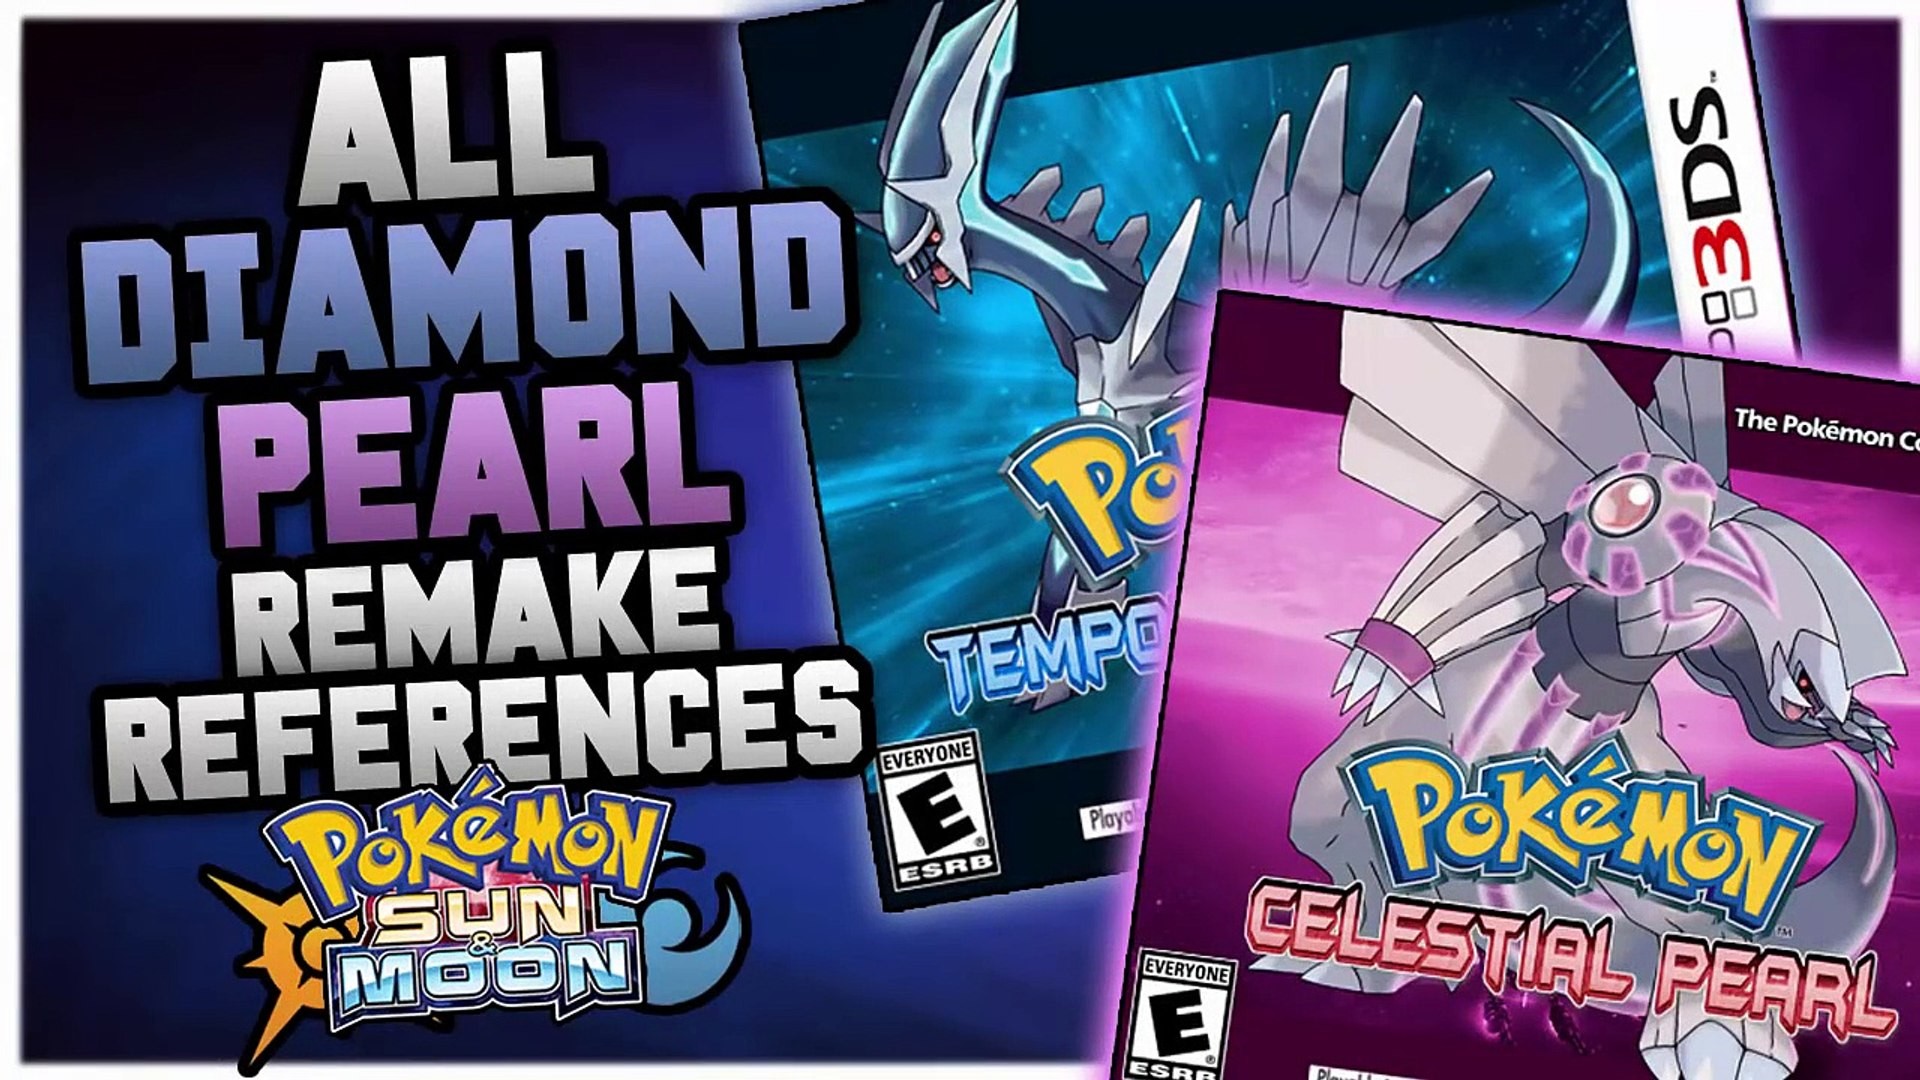 1920x1080 POKEMON DIAMOND & PEARL REMAKES CONFIRMED ALL HINTS AND REFER...